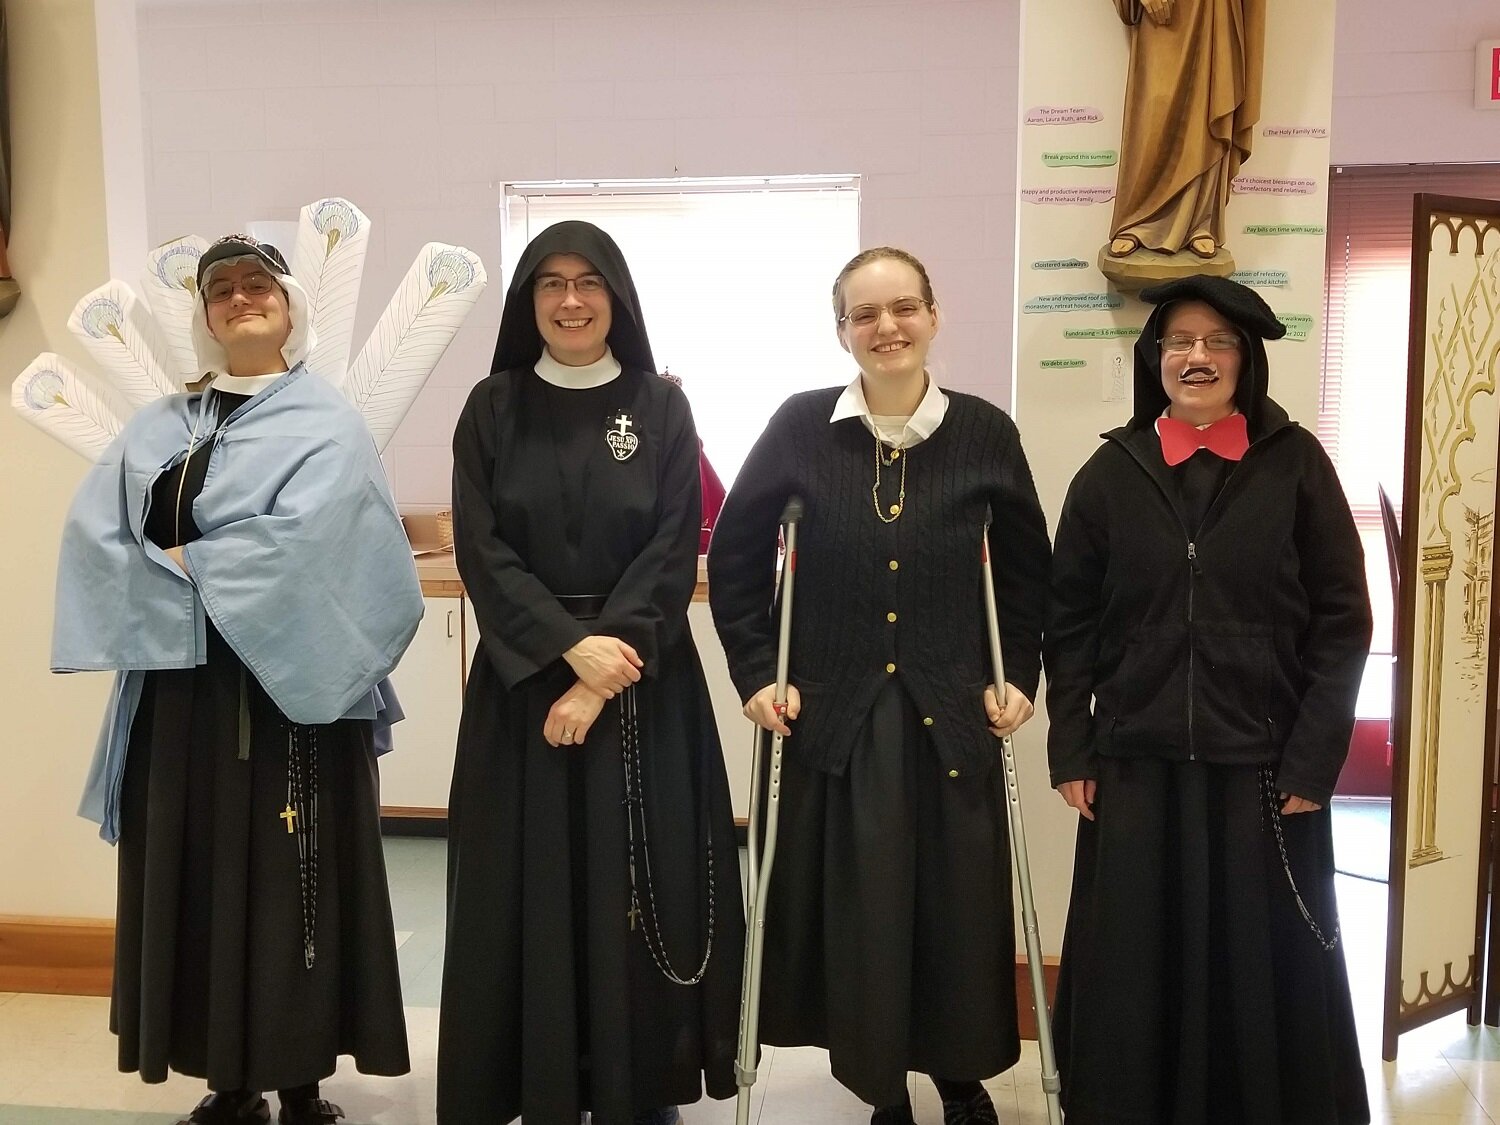  Mother John Mary poses with the cast for the skit: Sr. Miriam Esther as The Peacock, Postulant Abbey as Flannery O'Connor, and Sr. Frances Marie as Everyone Else 